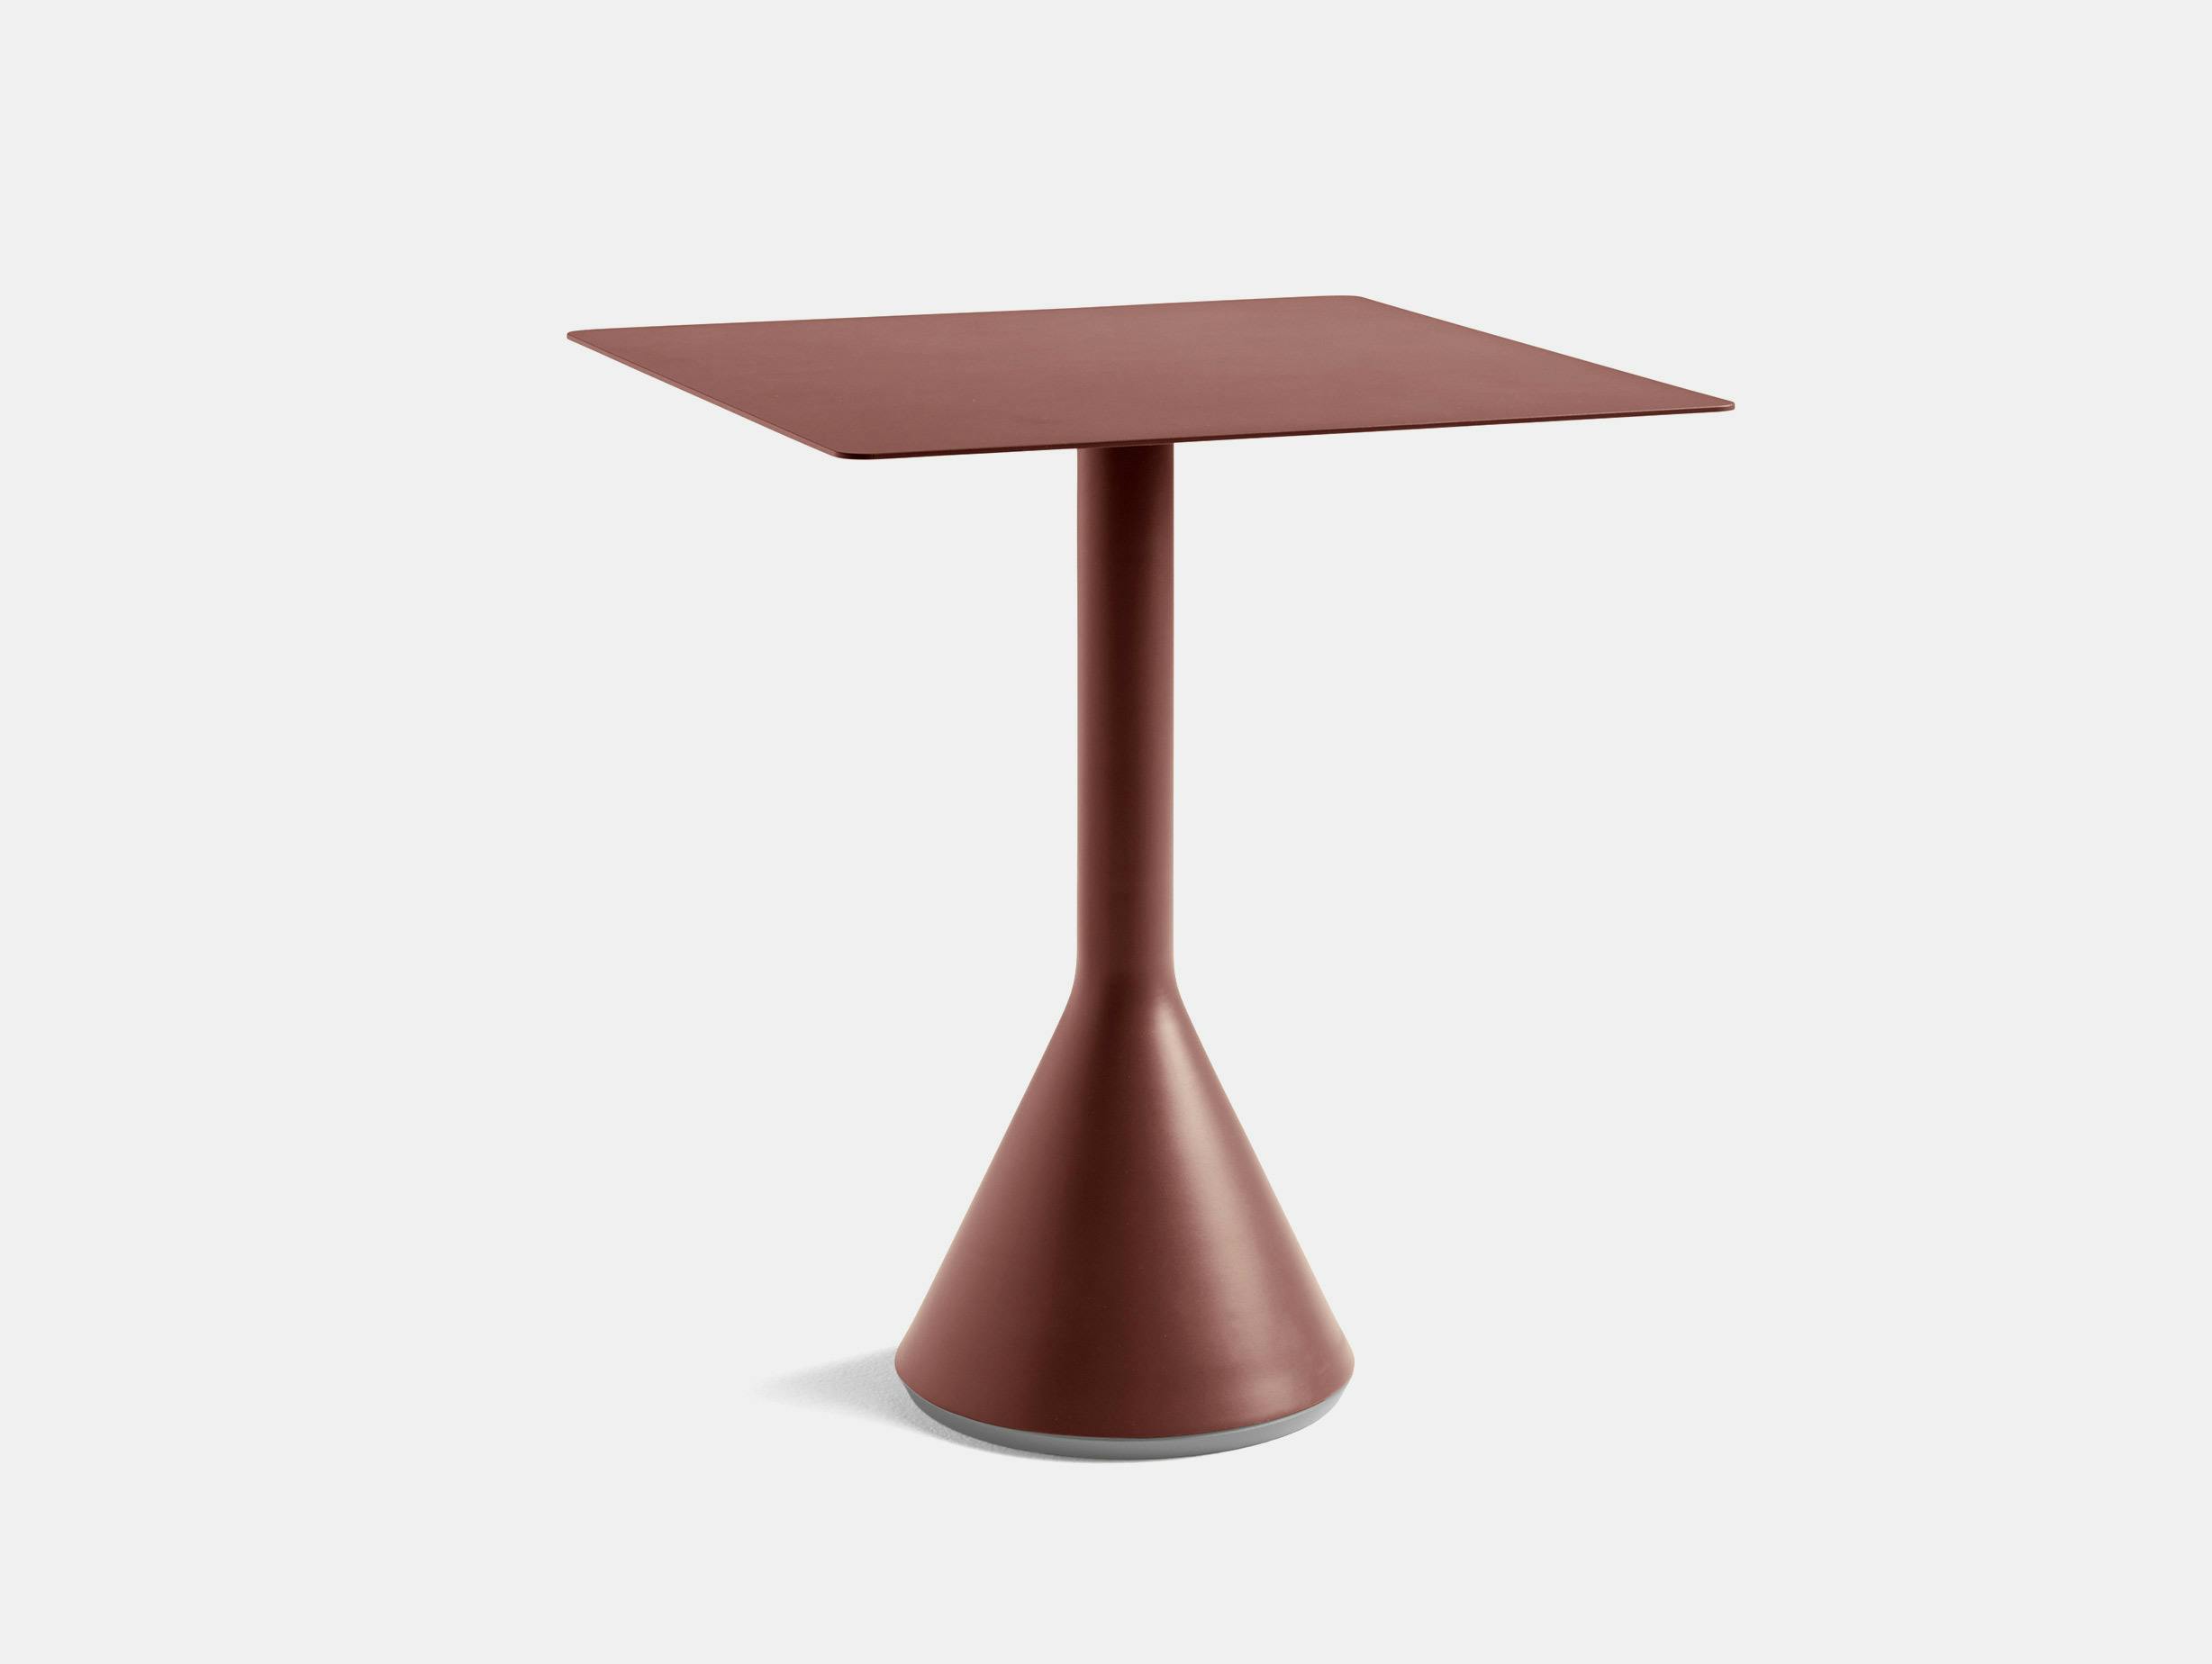 Hay ronan erwan bouroullec palissade cone table square iron red